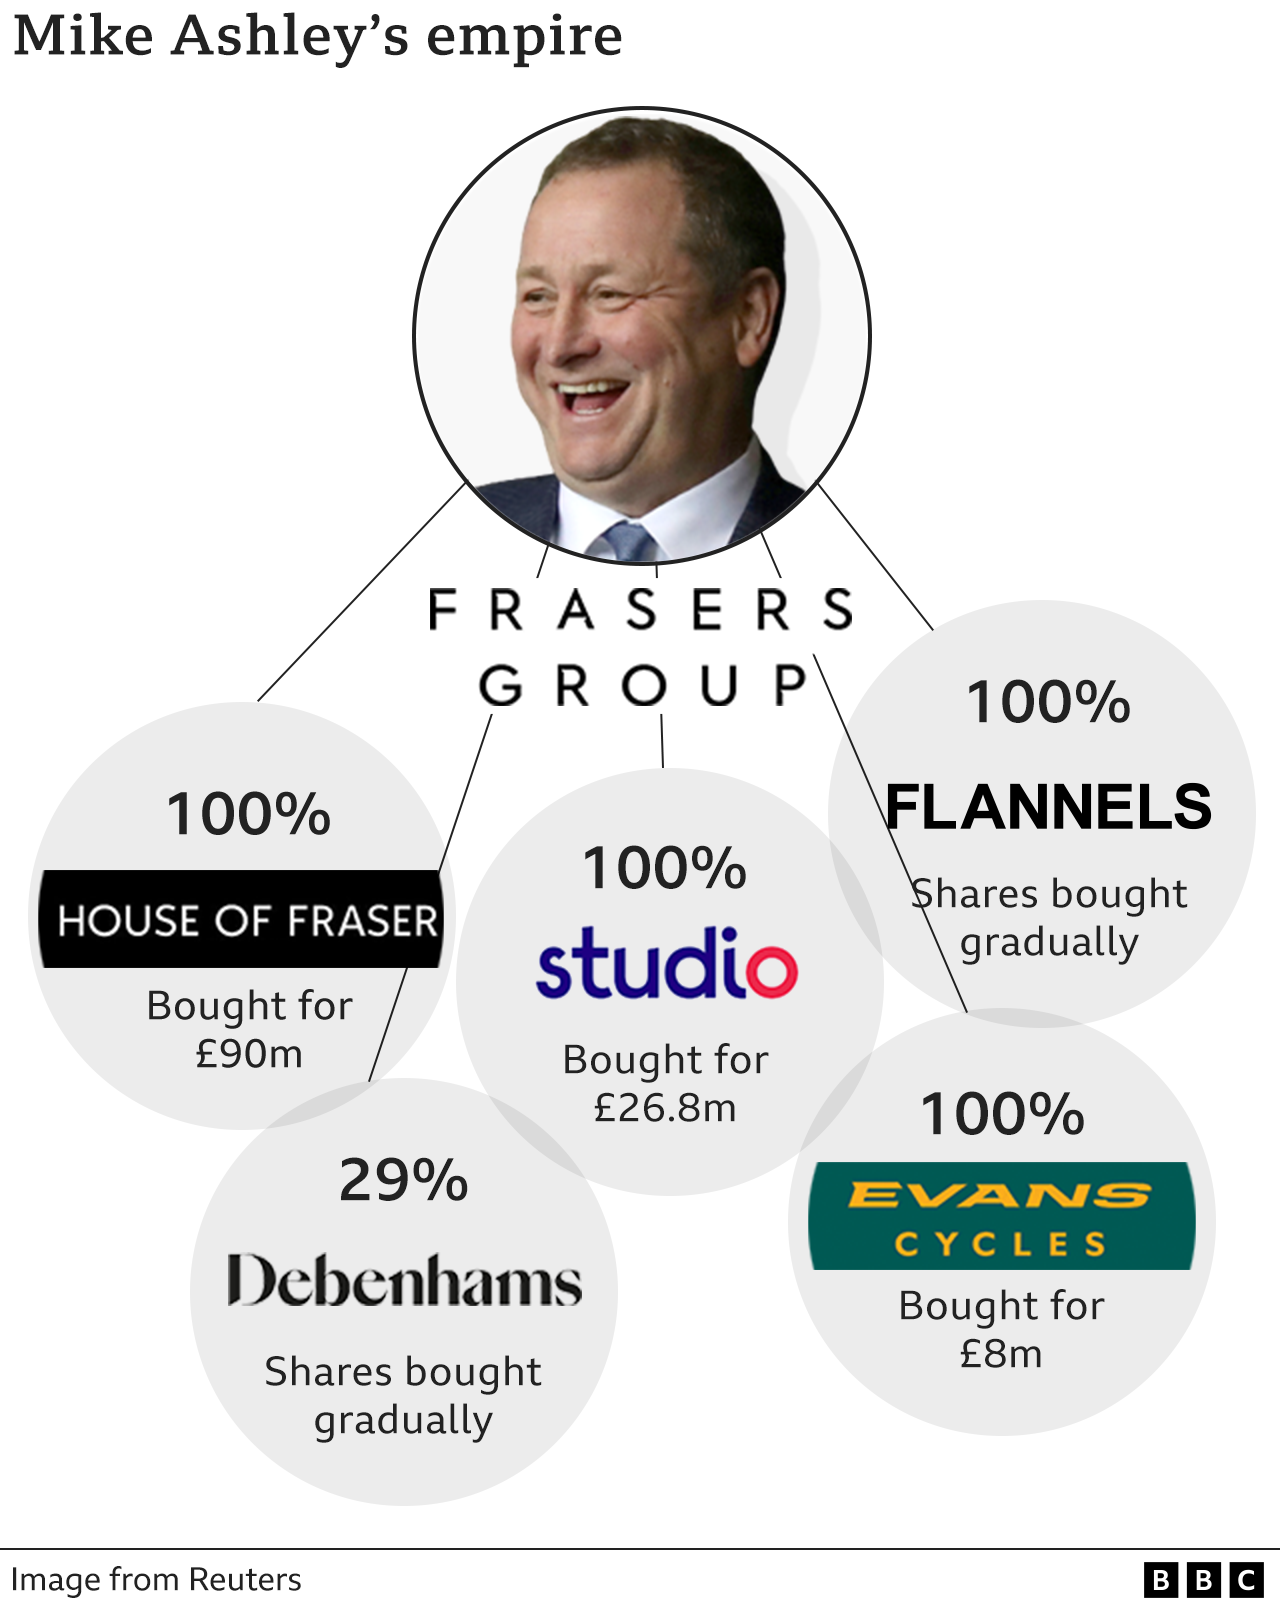 mike ashley's empire.